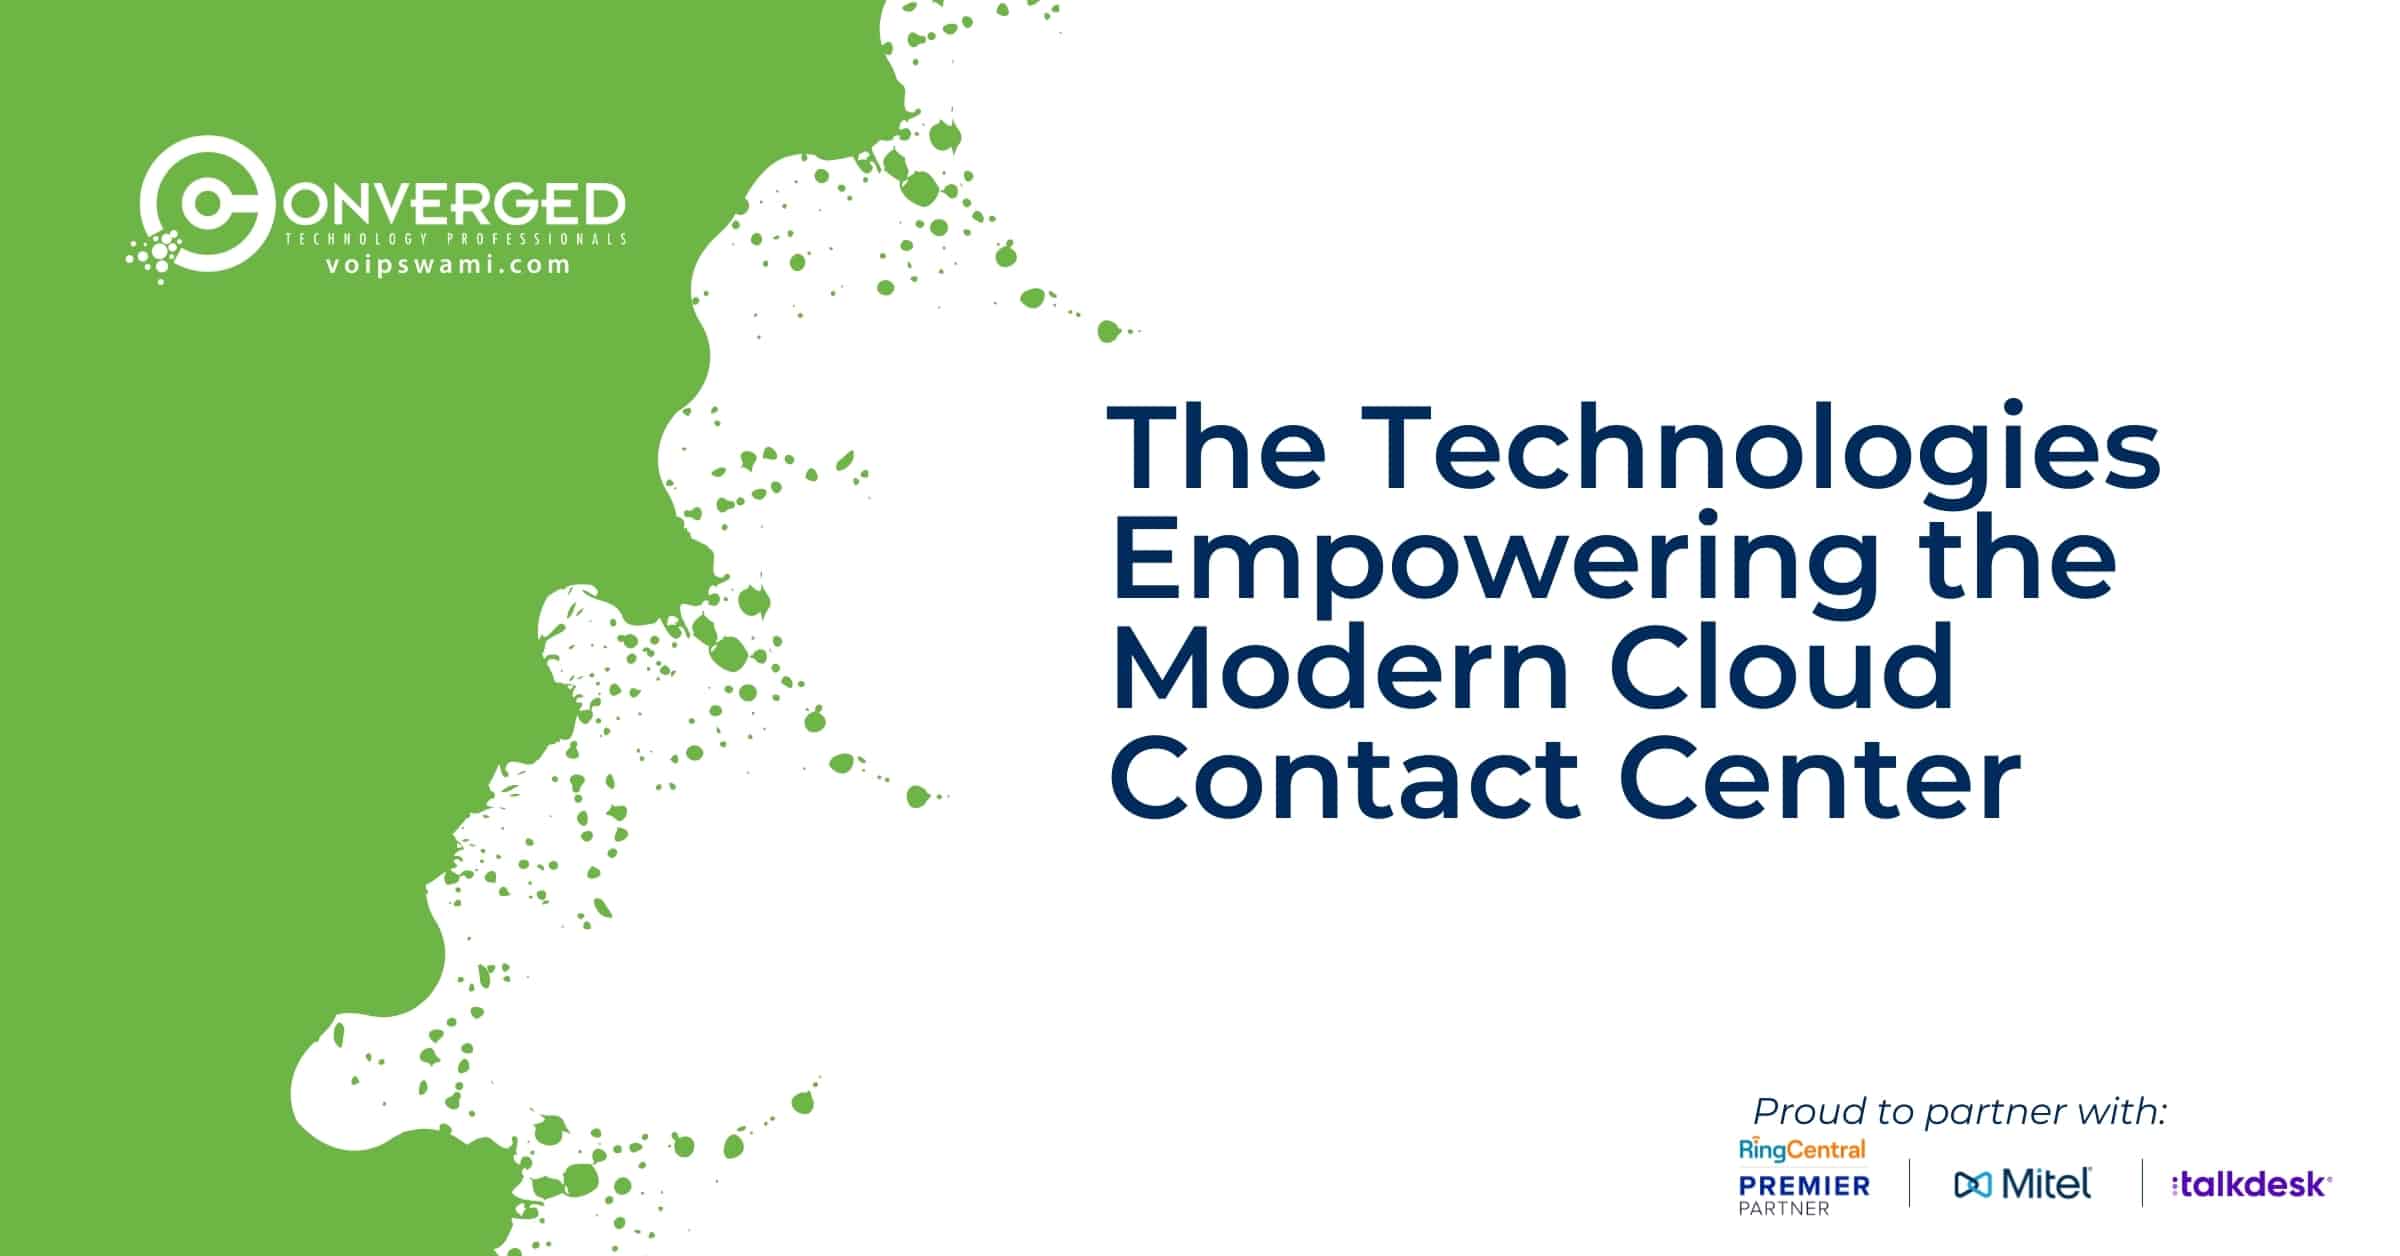 The Technologies Empowering the Modern Cloud Contact Center